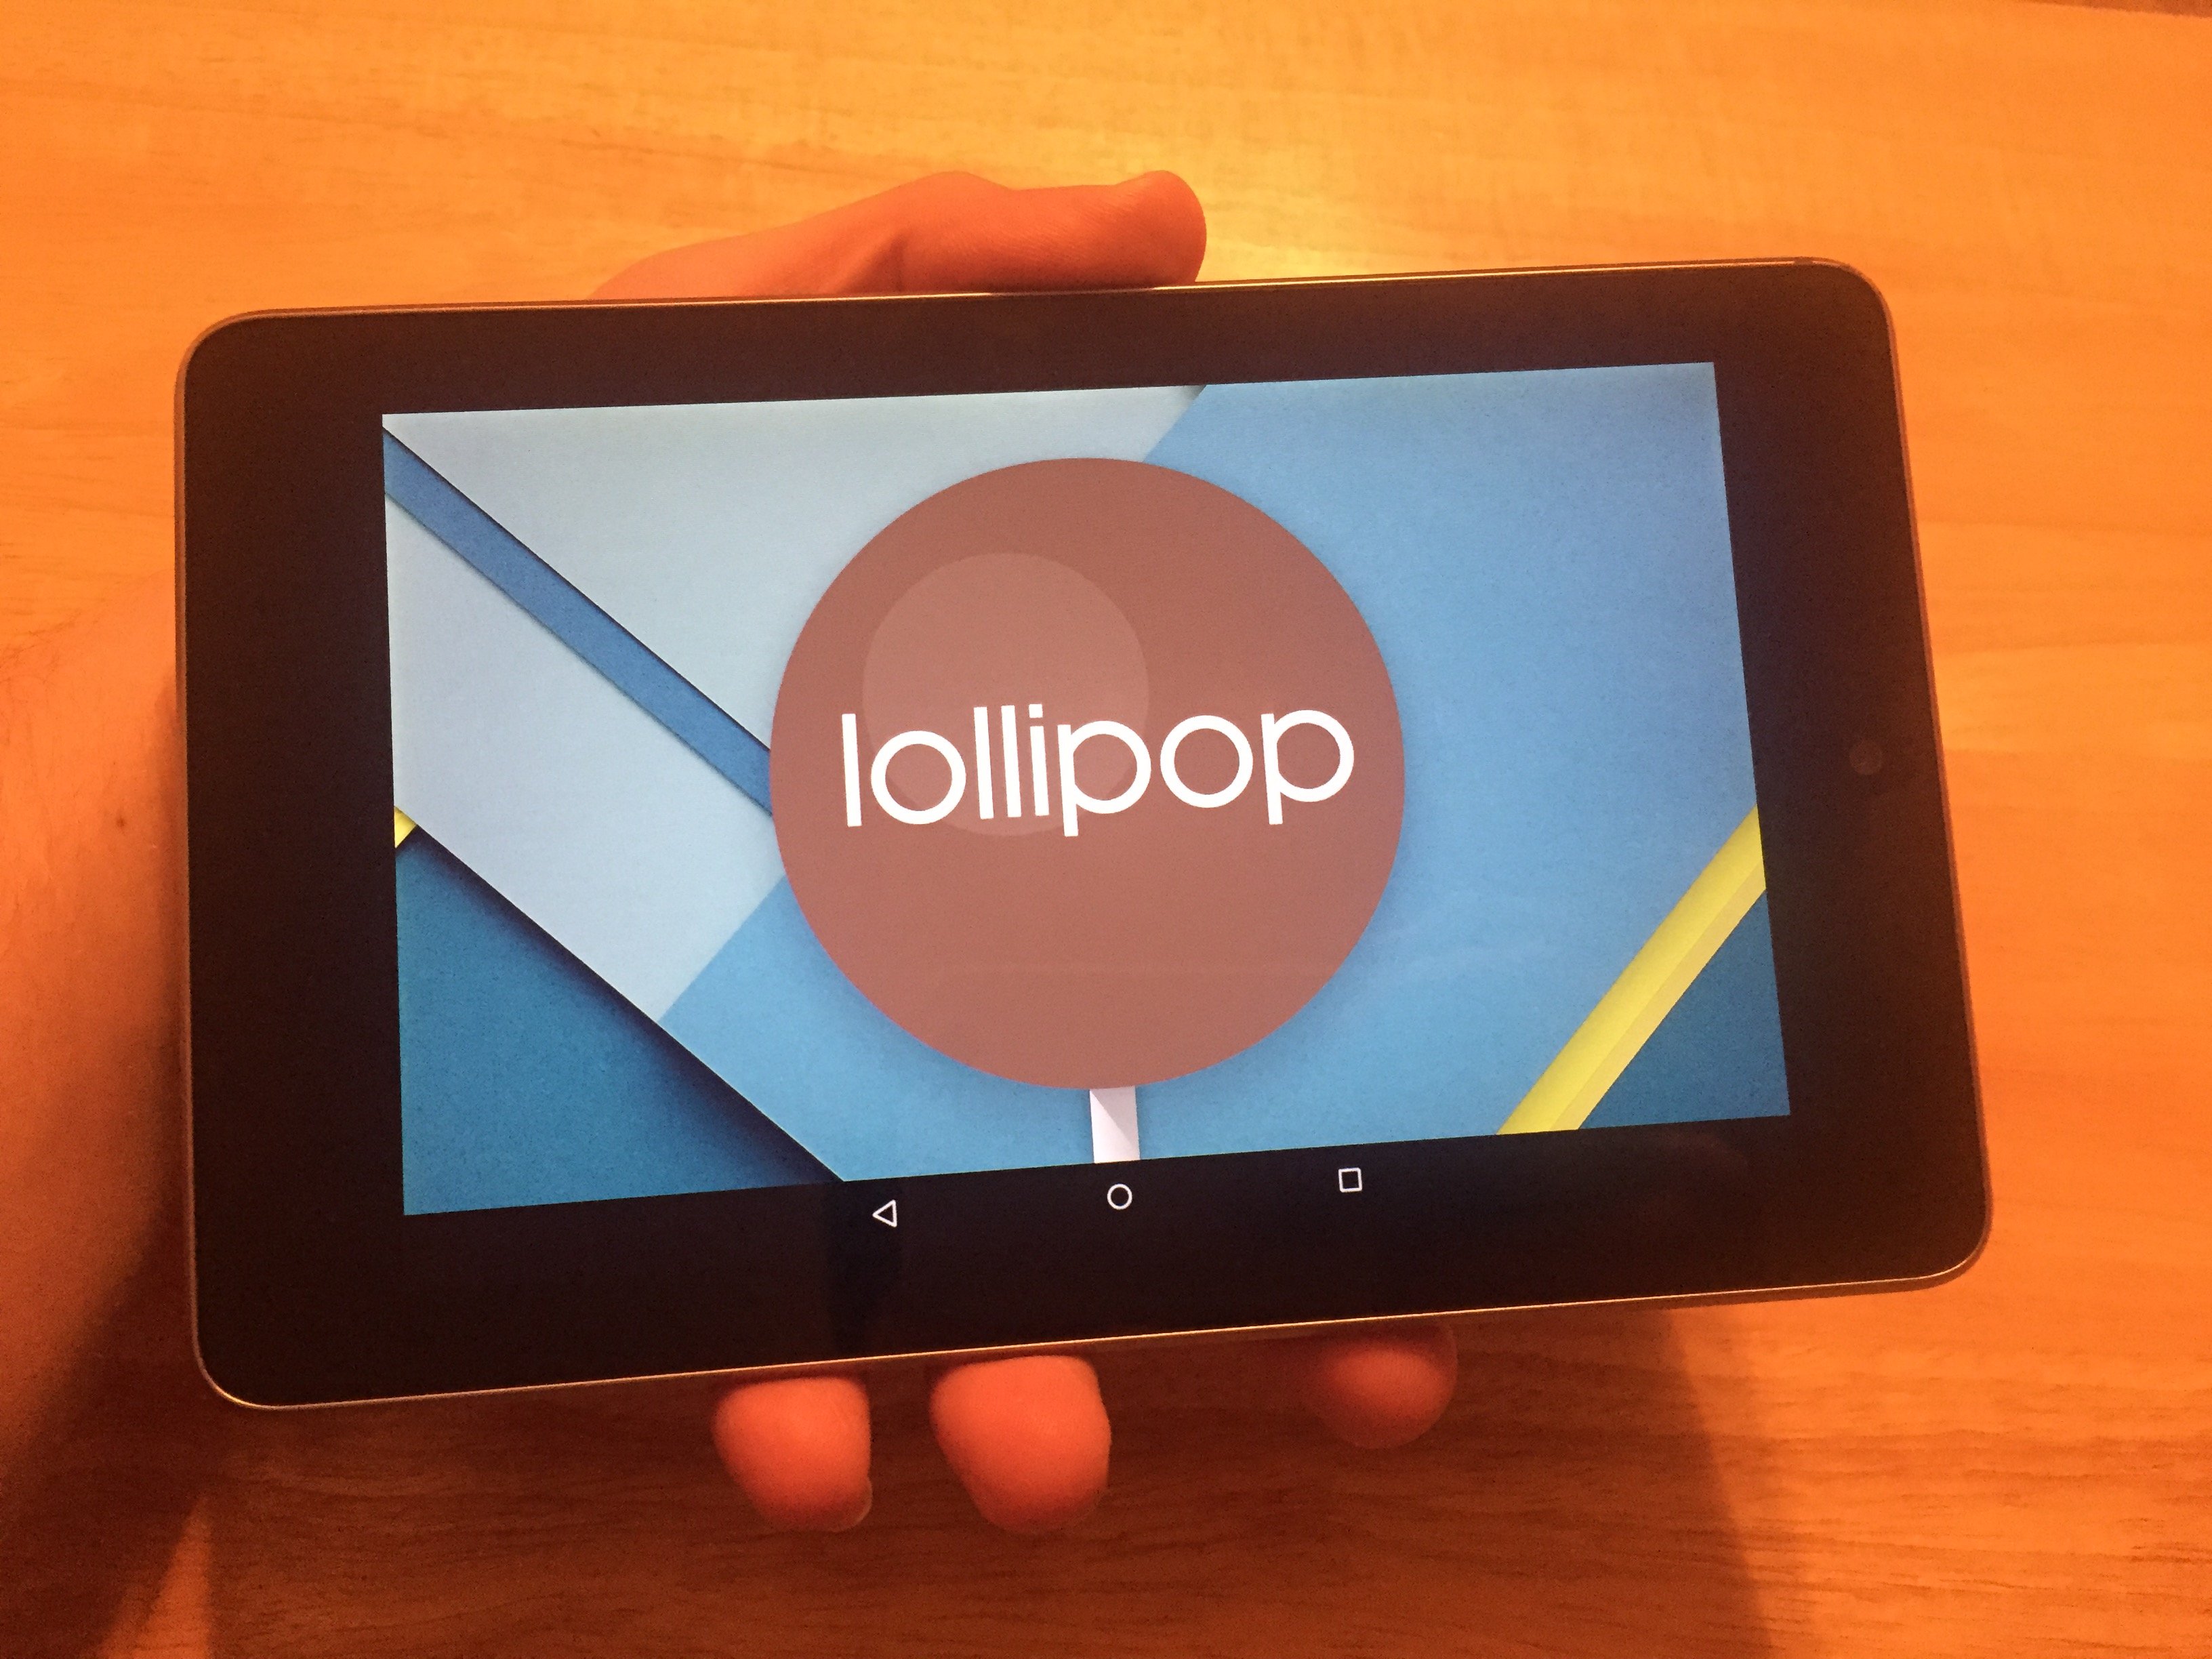 What you need to know about Android 5.0.2 on the Nexus 7 2012.